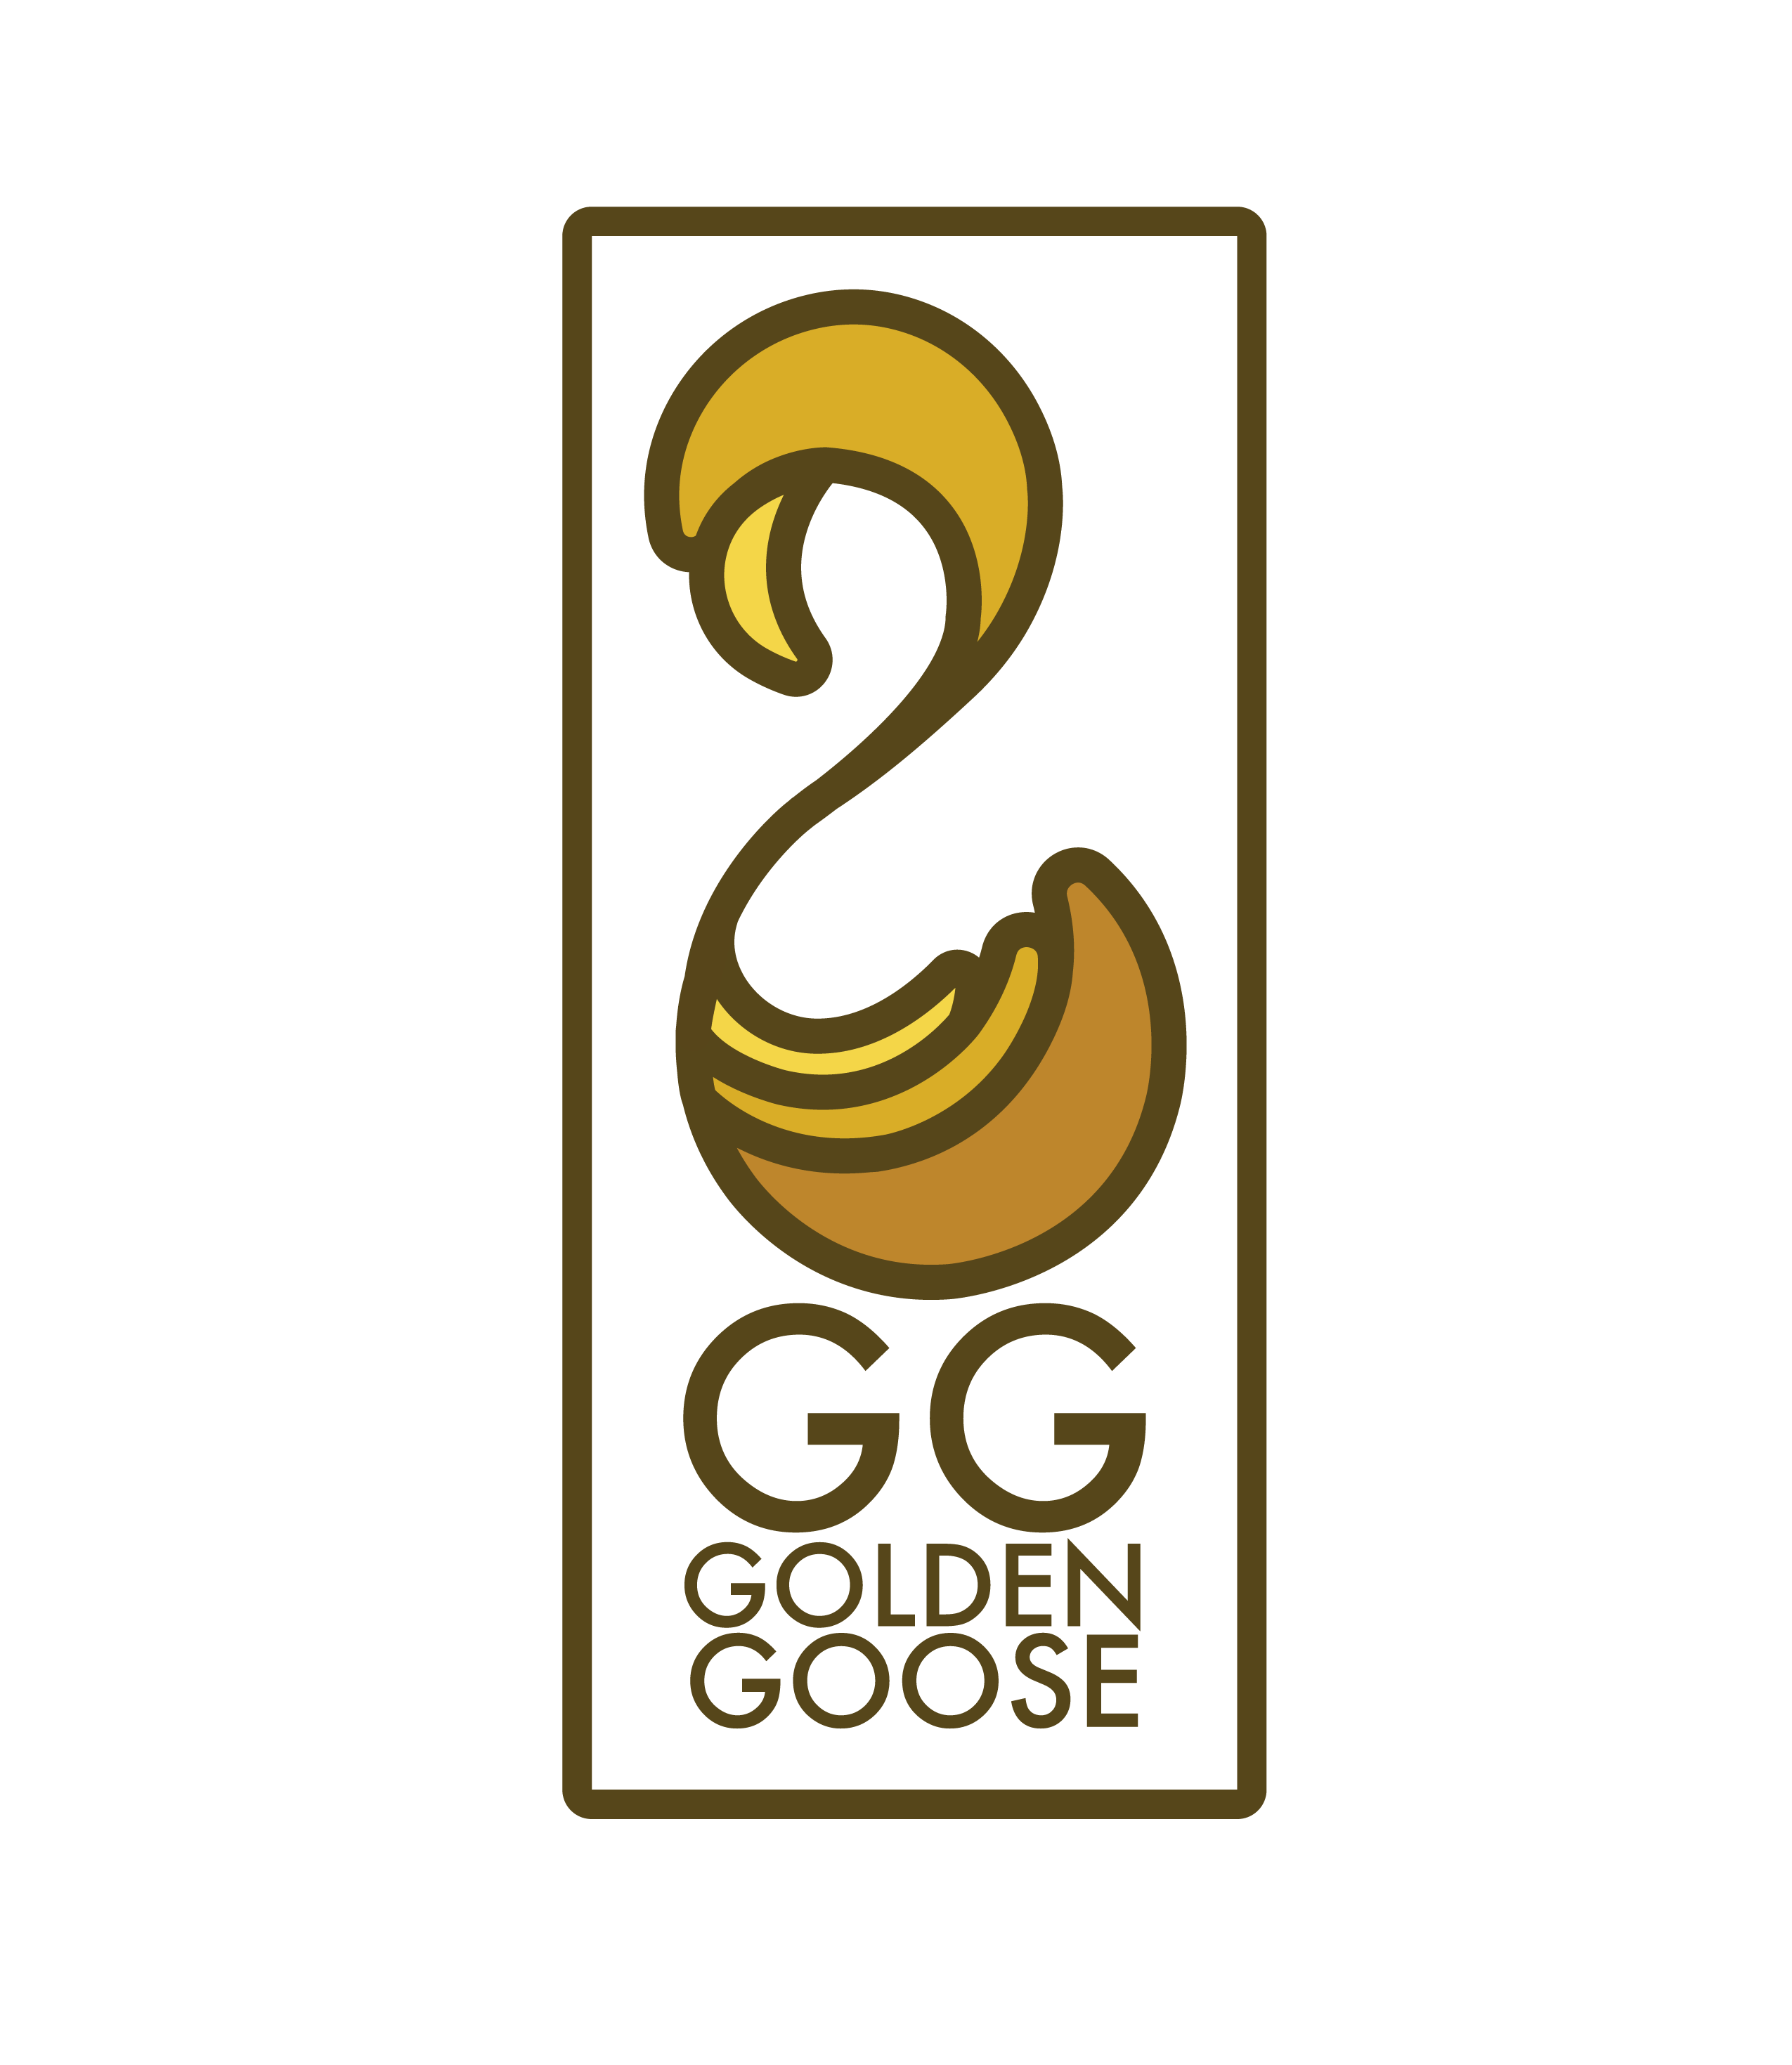 Golden Goose Product Visualization on Behance